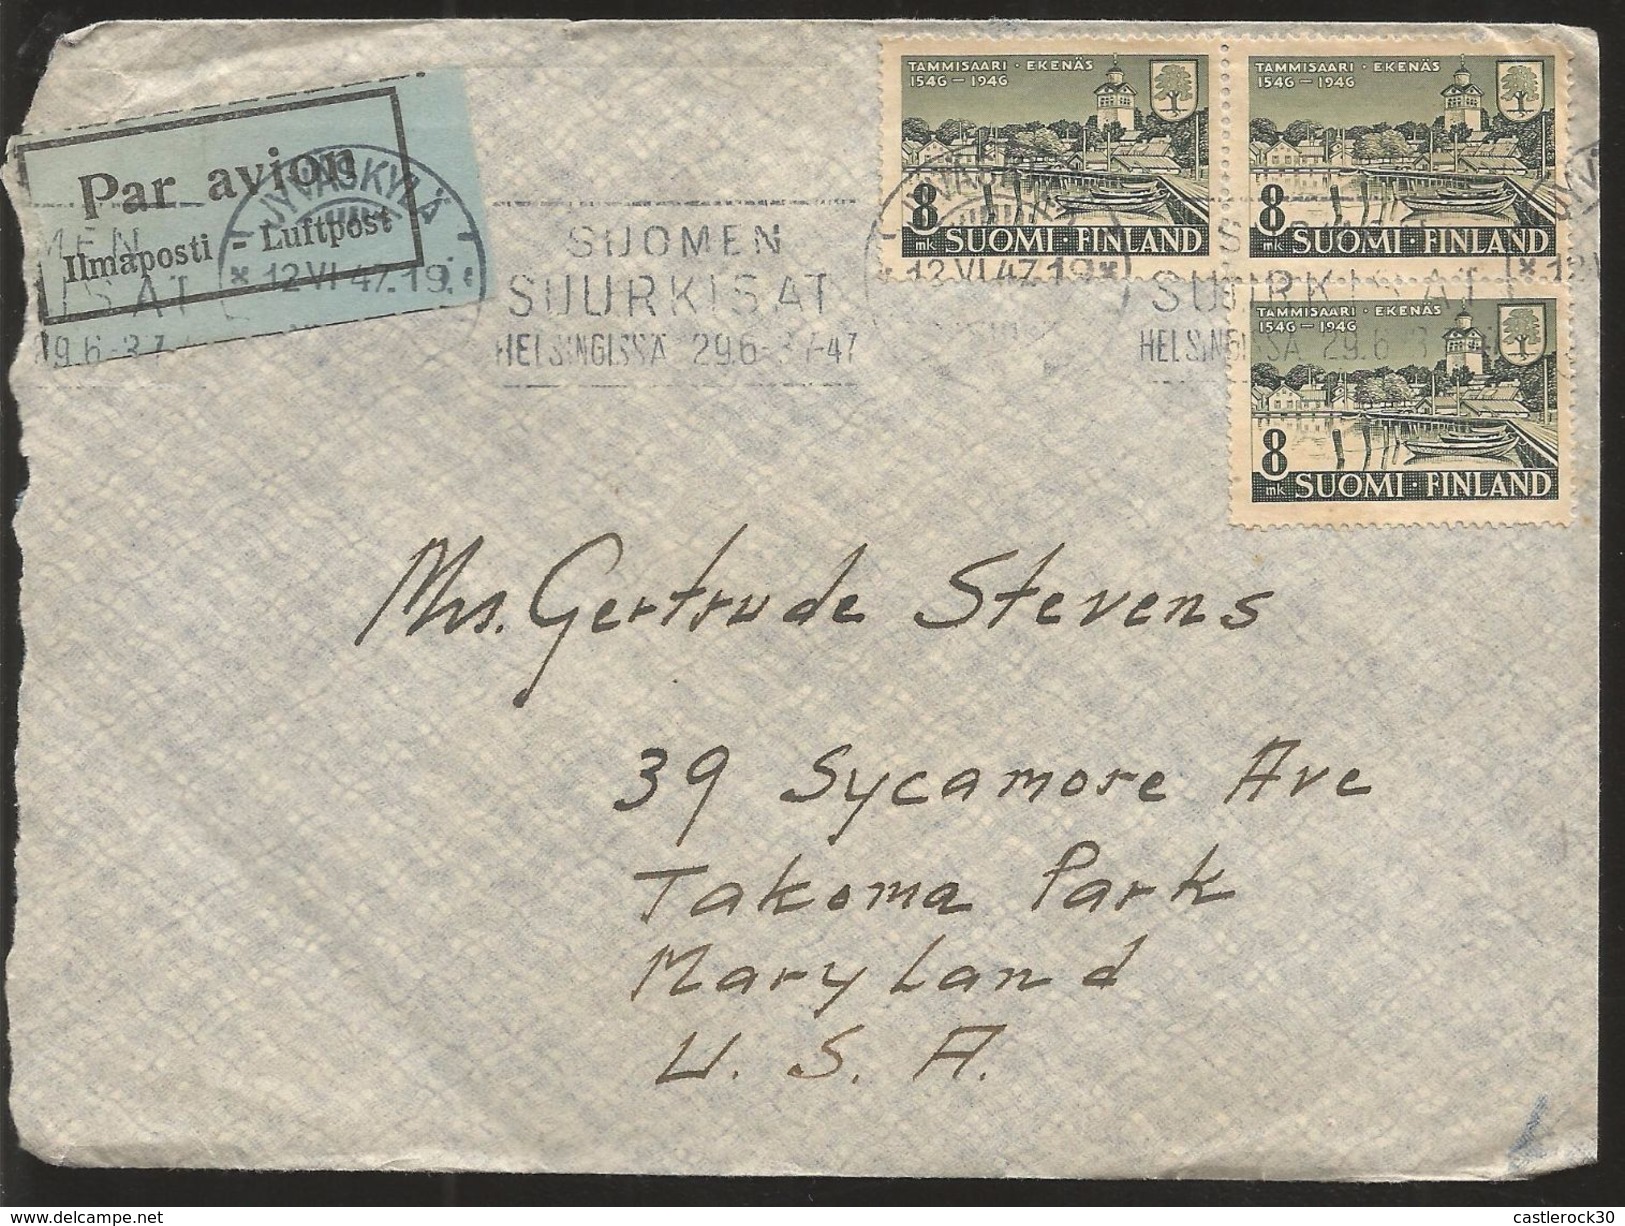 A) 1947 FINLAND, TOWN OF TAMISAARI, SEA, ARCHITECTURE, BOAT, CIRCULATED COVER FROM FINLAND TO USA. - Gebraucht